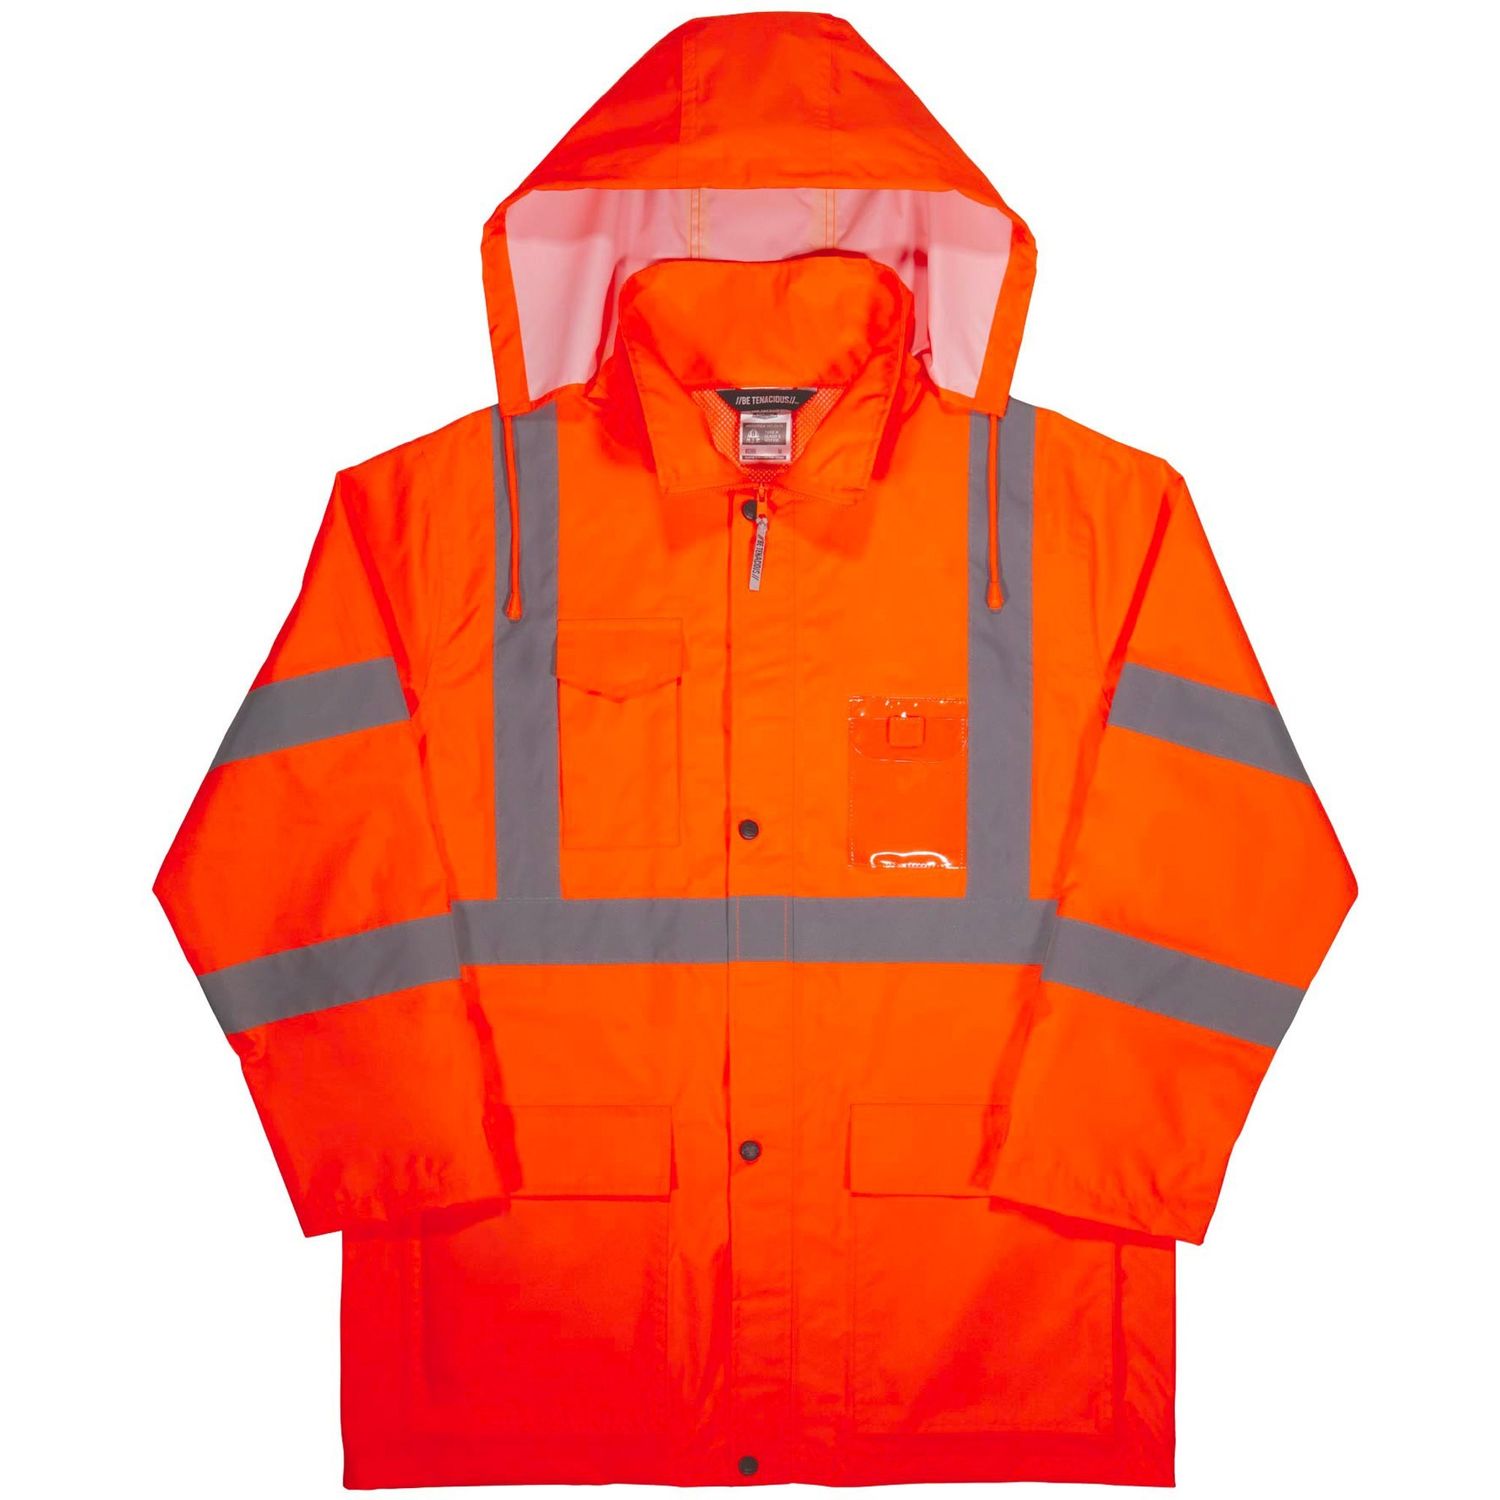 8366 Lightweight Hi-Vis Rain Jacket - Type R Class 3, Recommended for: Construction, Utility, Emergency, Cell Phone, Airline Crew, Railway Worker, Survey Crew